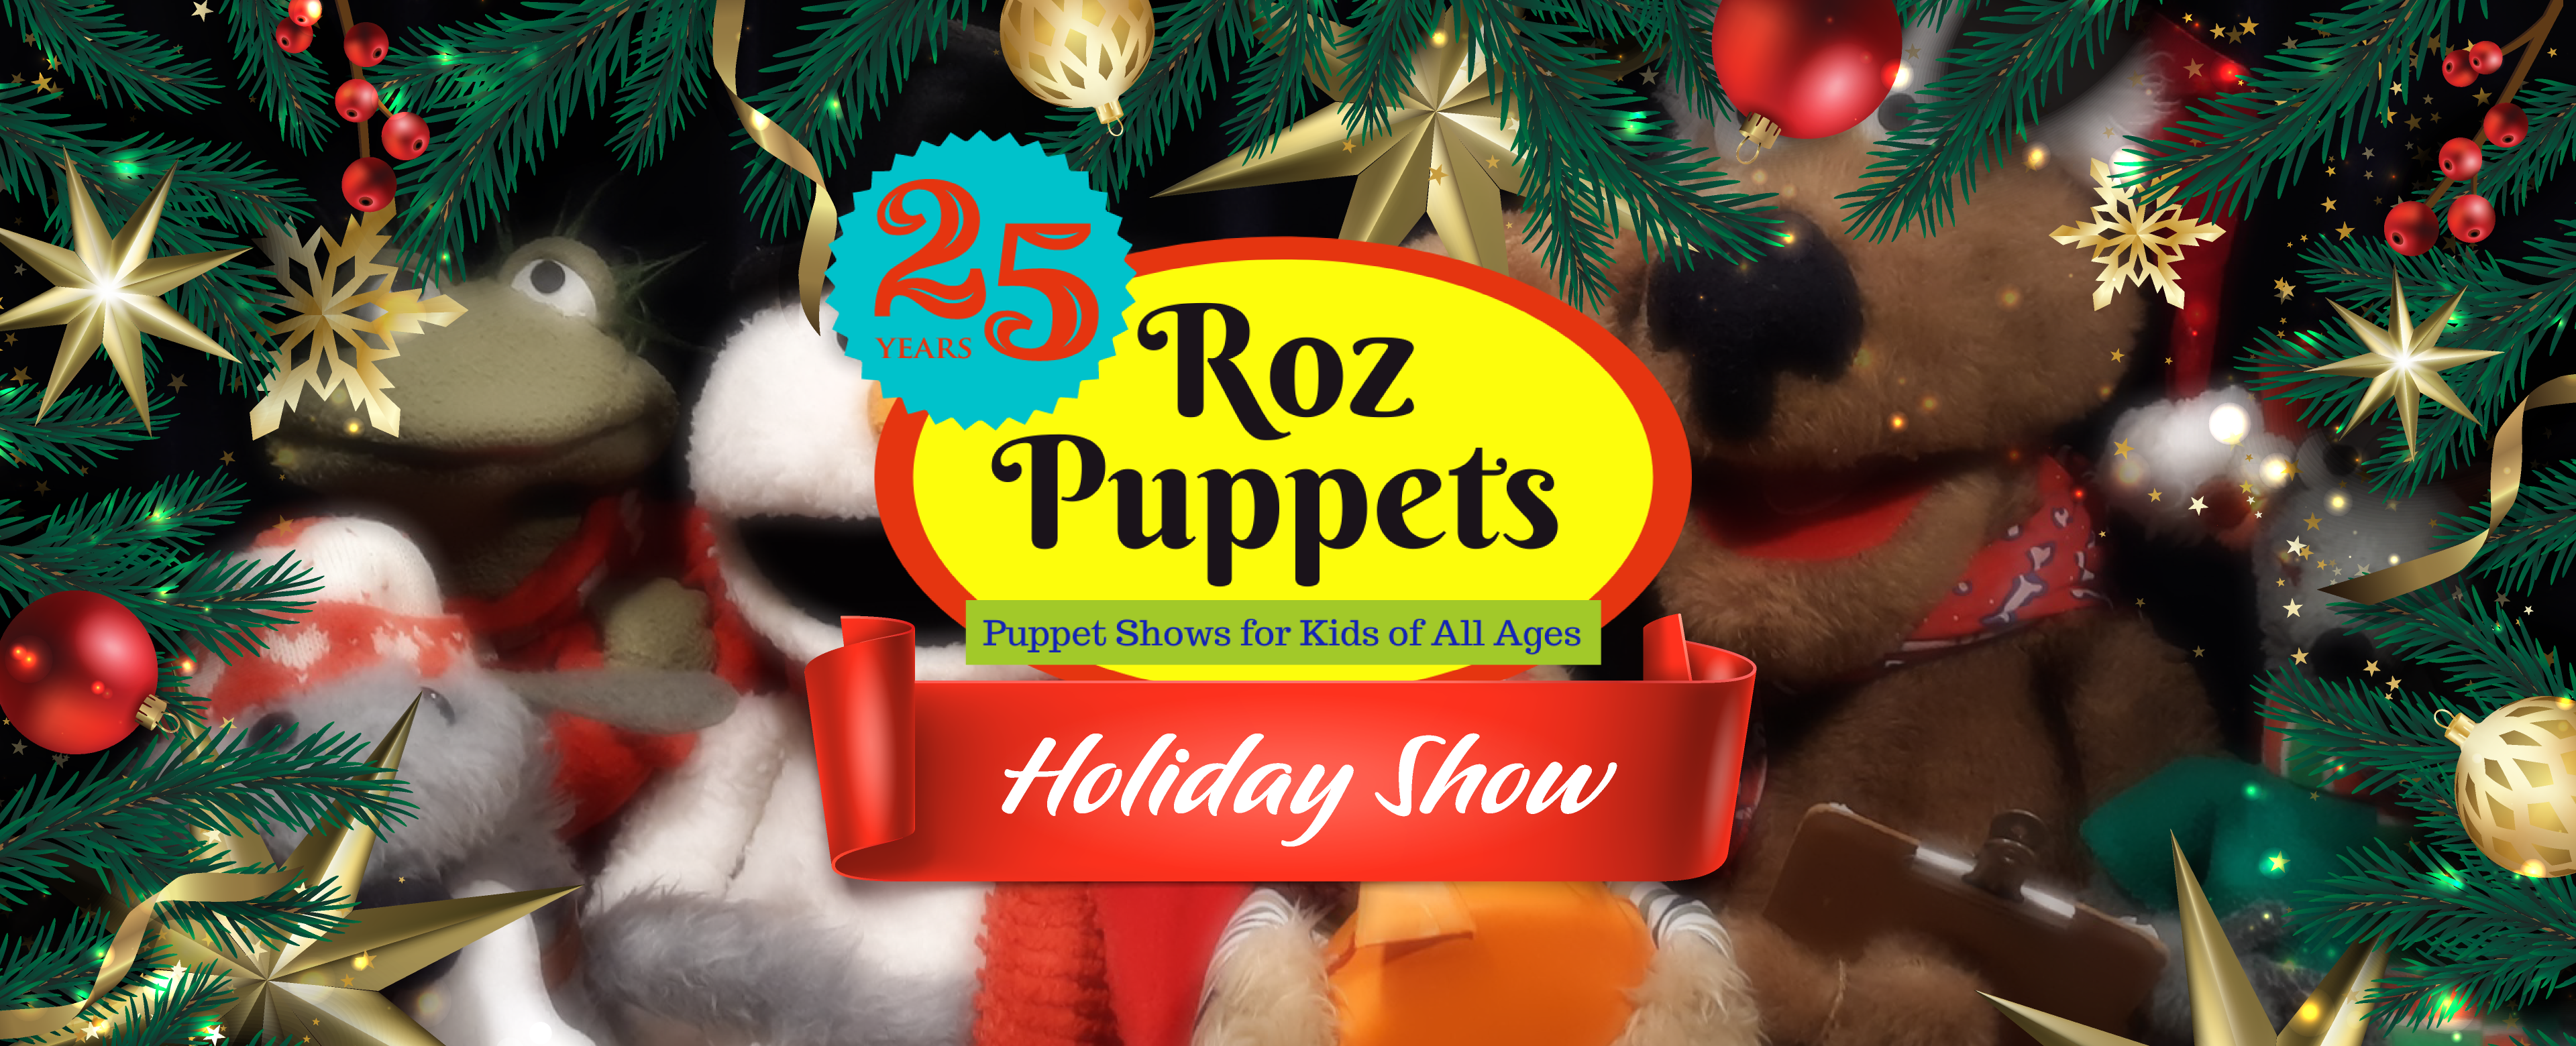 Roz Puppets Holiday Show